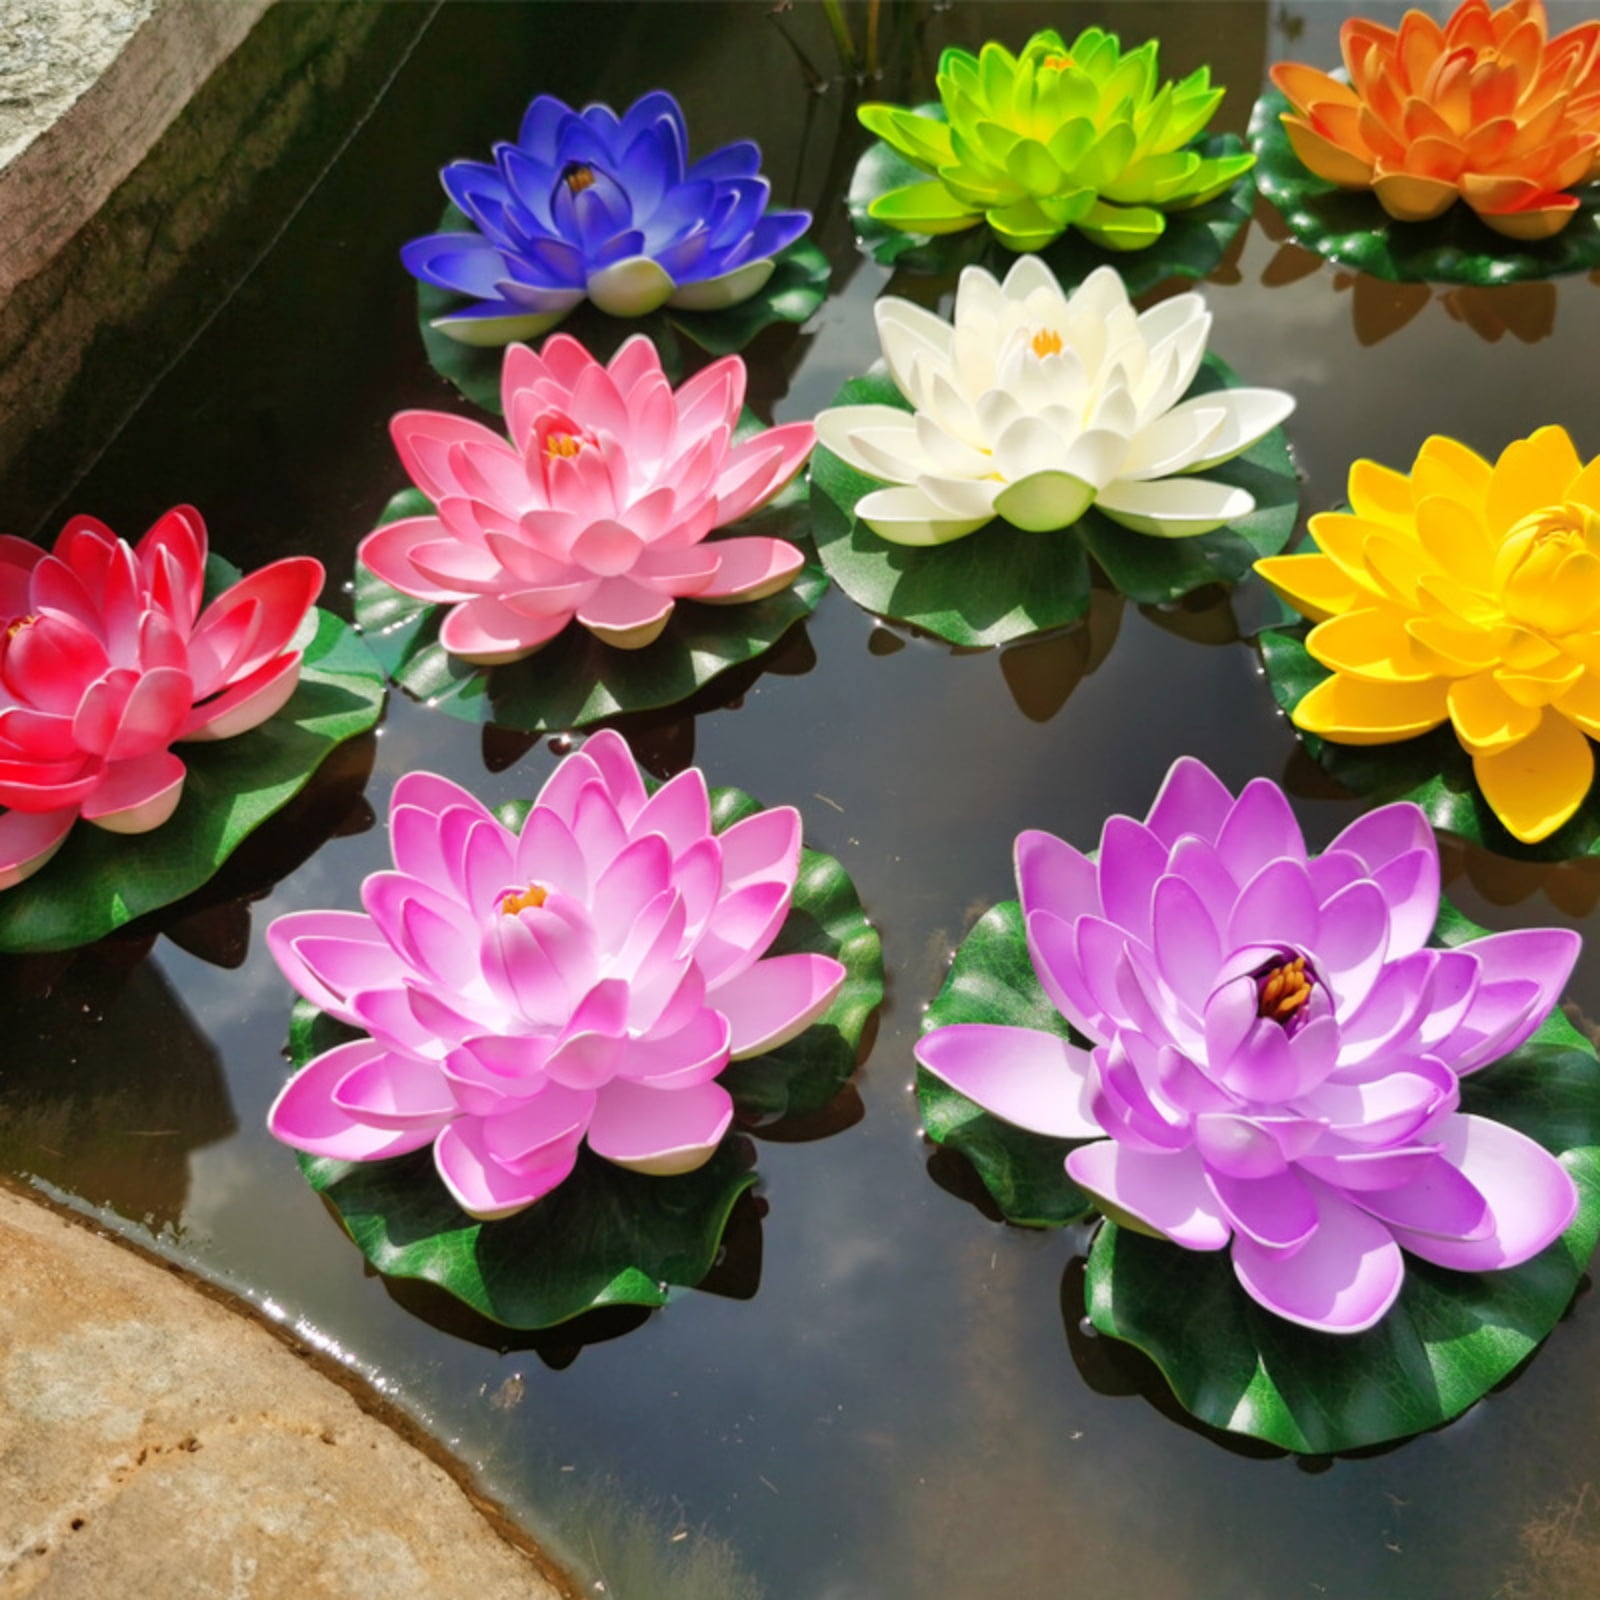 Qiyun 7 Artificial Floating Lotus Flower For Garden Pool Pond Decor Other